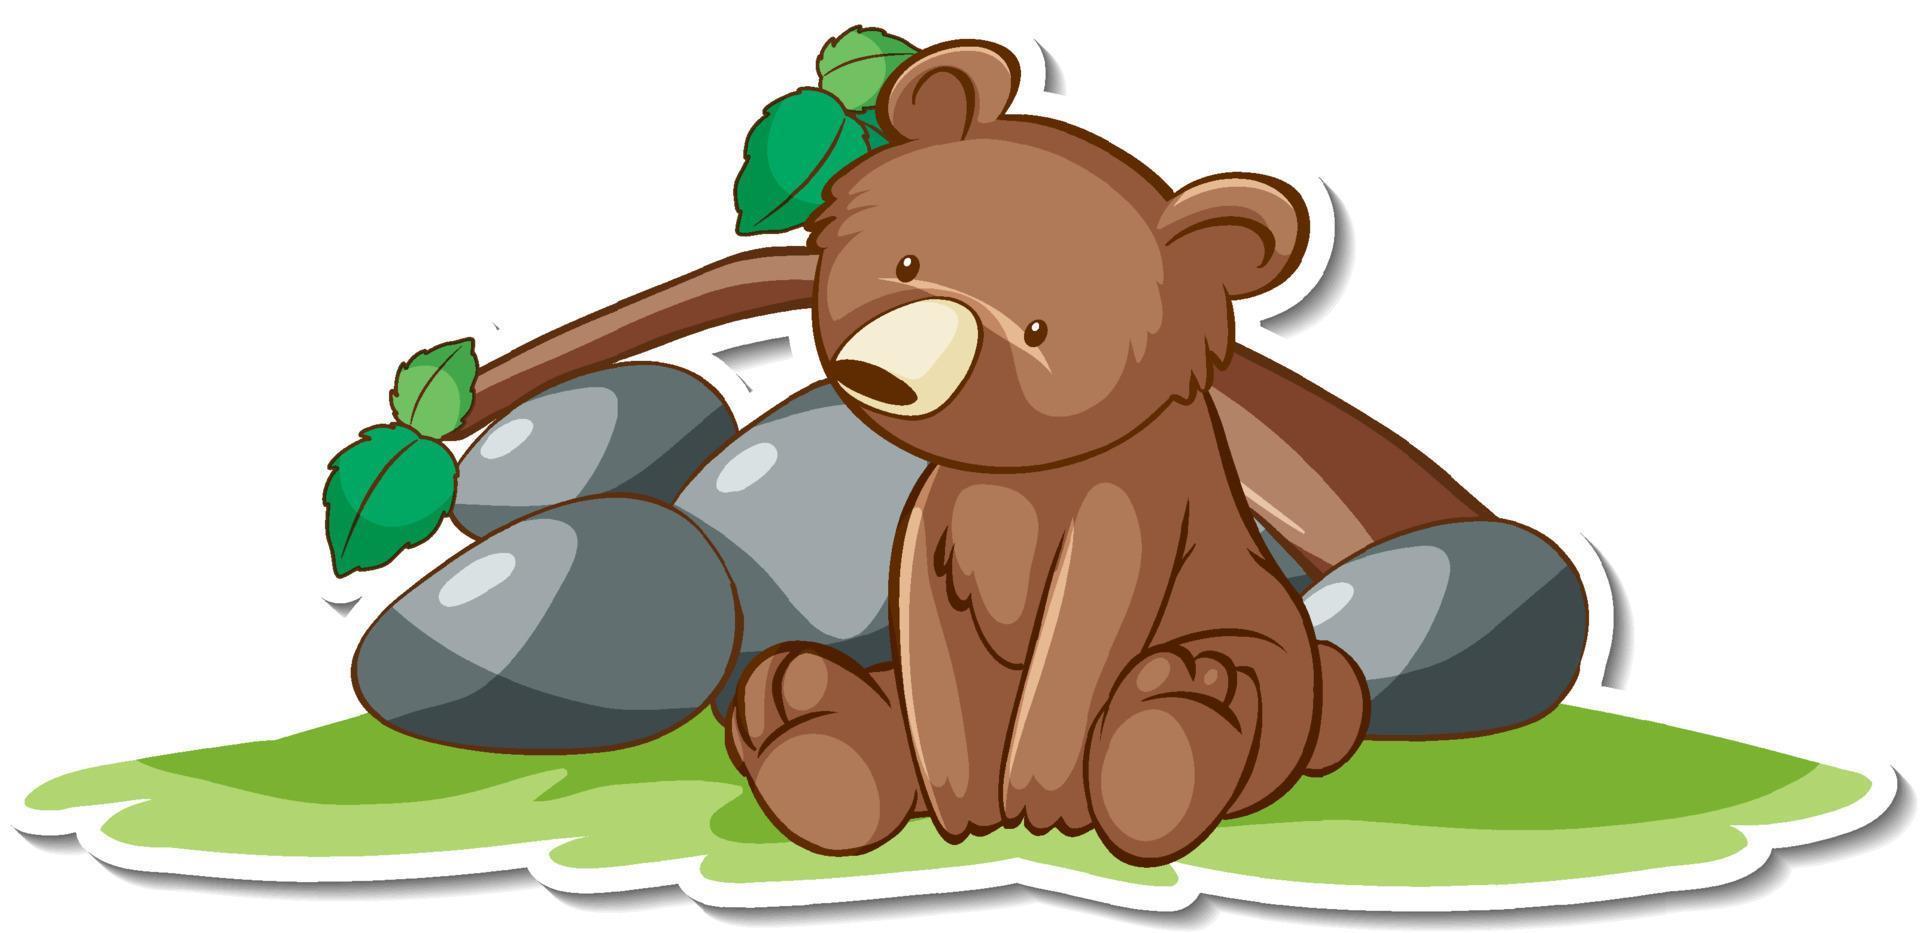 Cute grizzly bear in sitting pose sticker vector